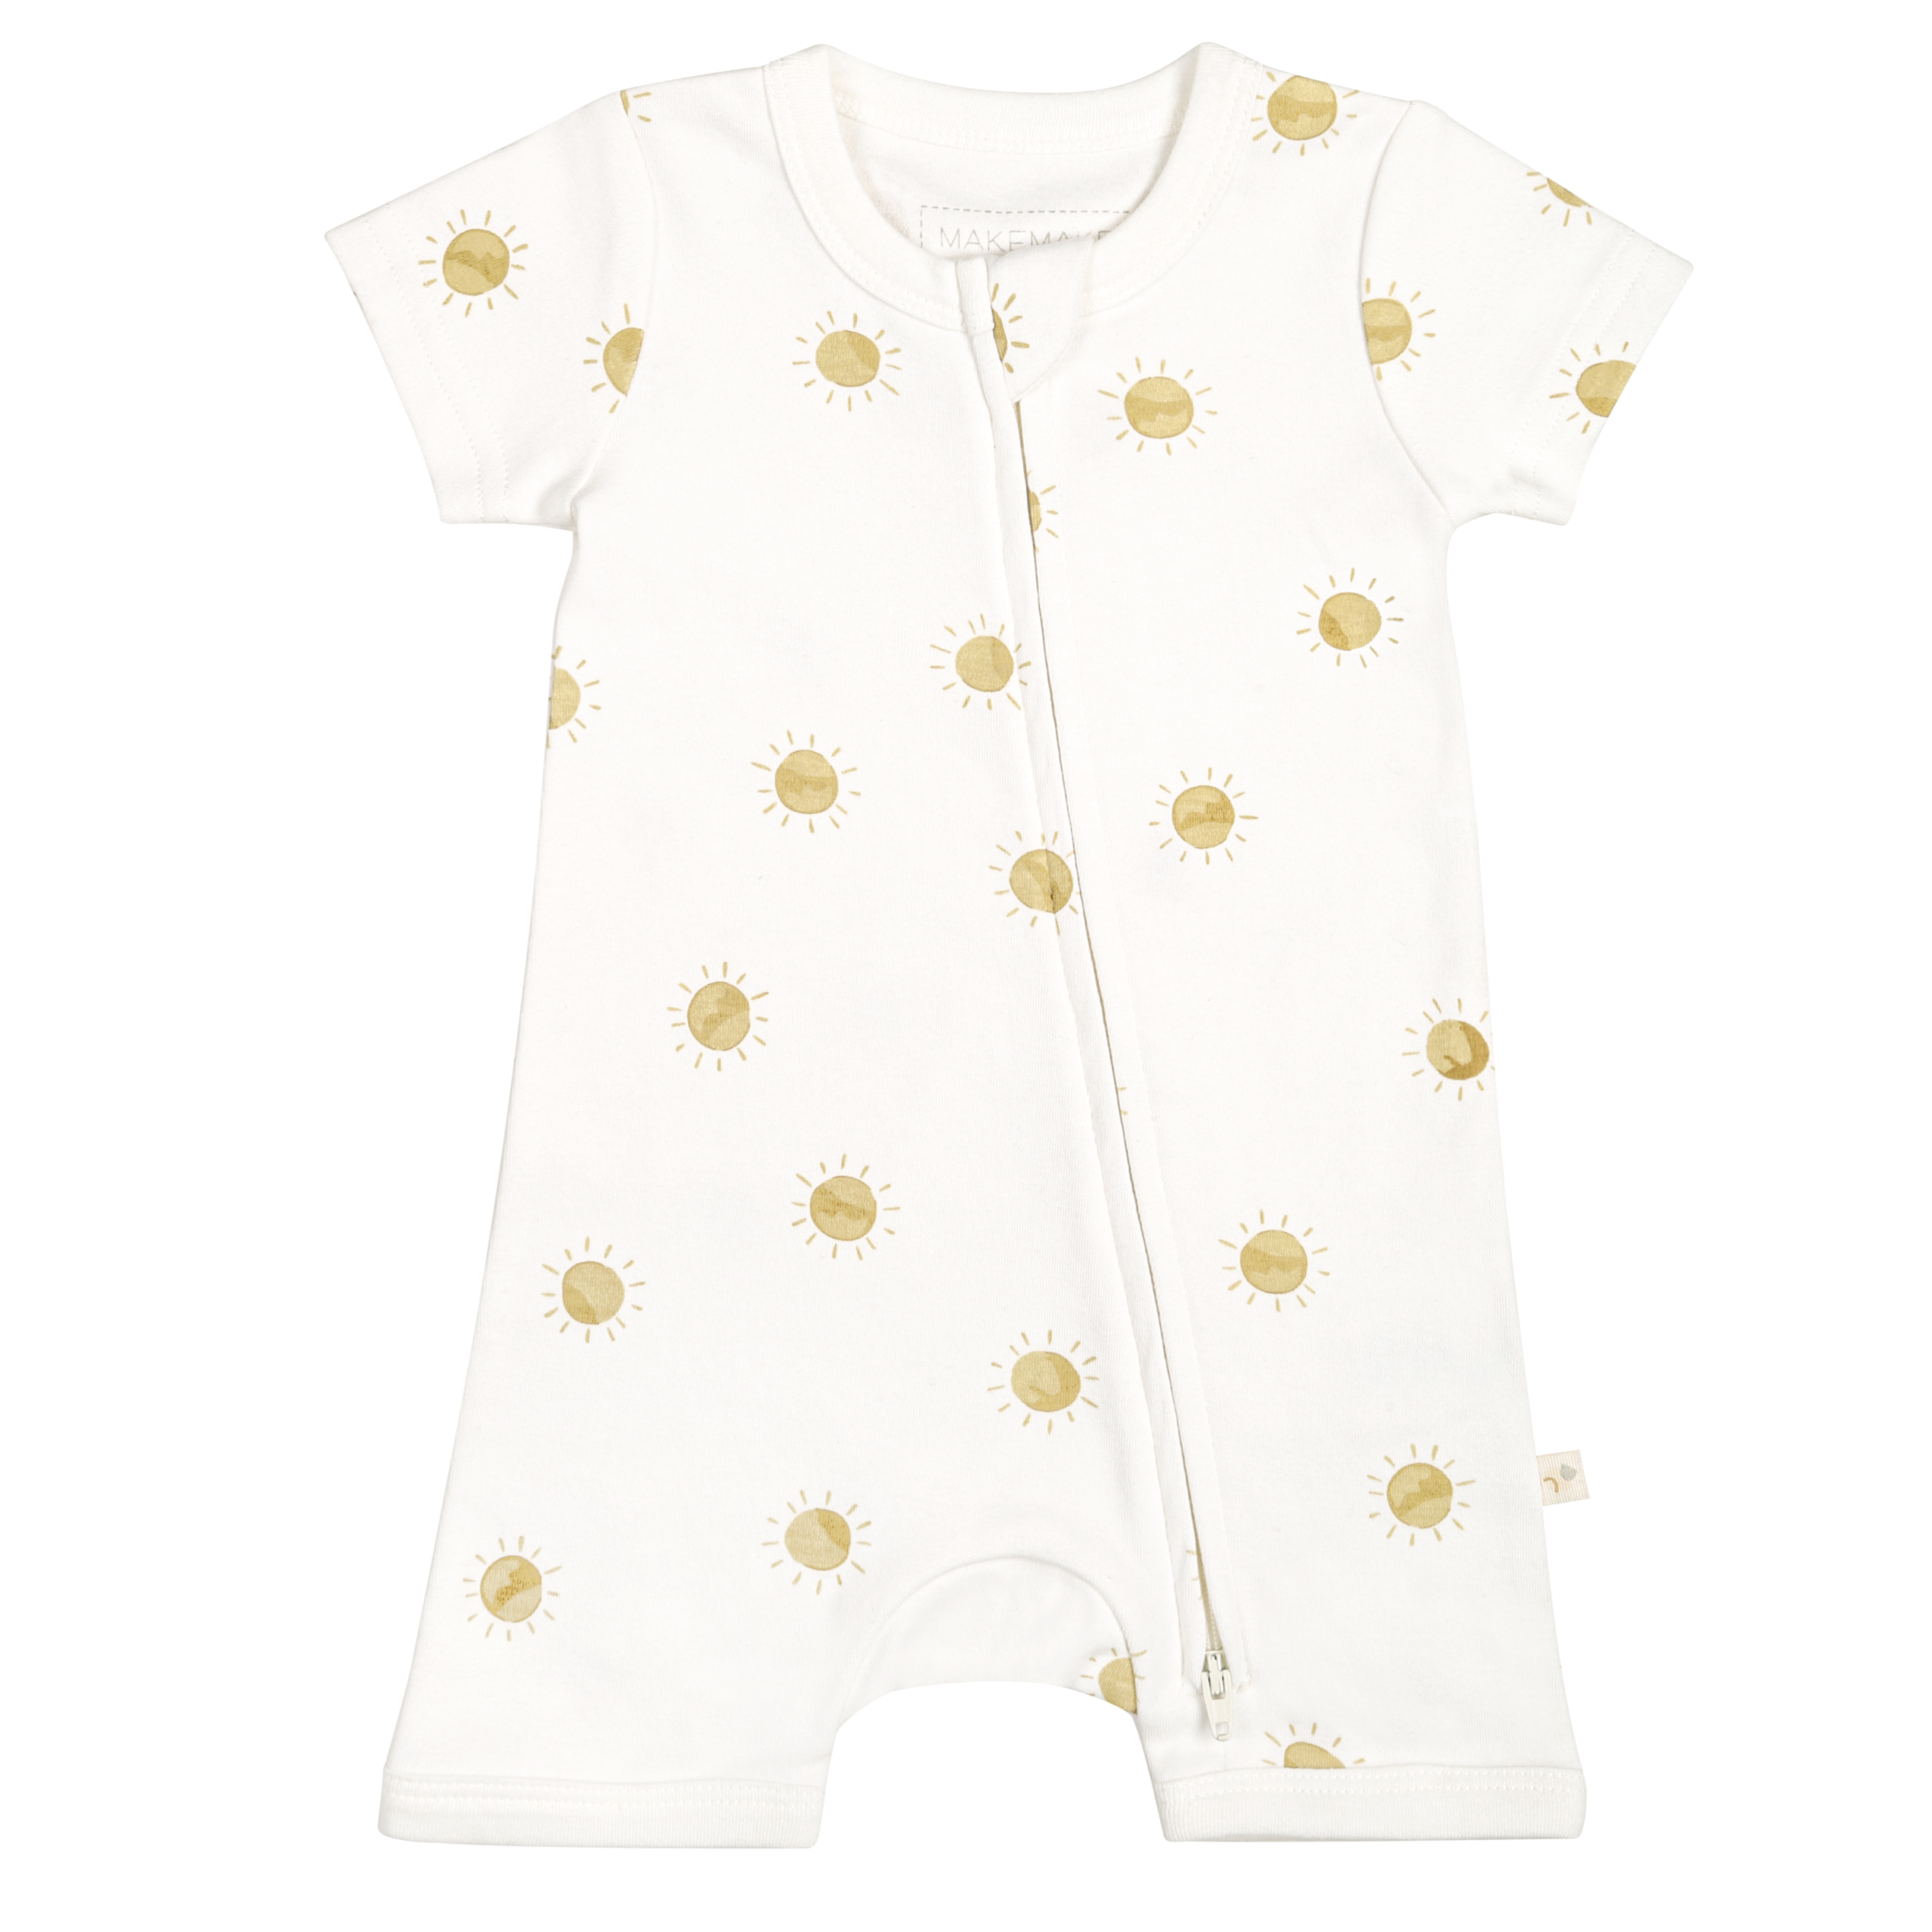 A toddler's white Organic Short Zip Romper - Sunshine from Makemake Organics, featuring a pattern of golden suns, short sleeves, a rounded neckline, and a zipper closure running diagonally from the neckline to the left leg.